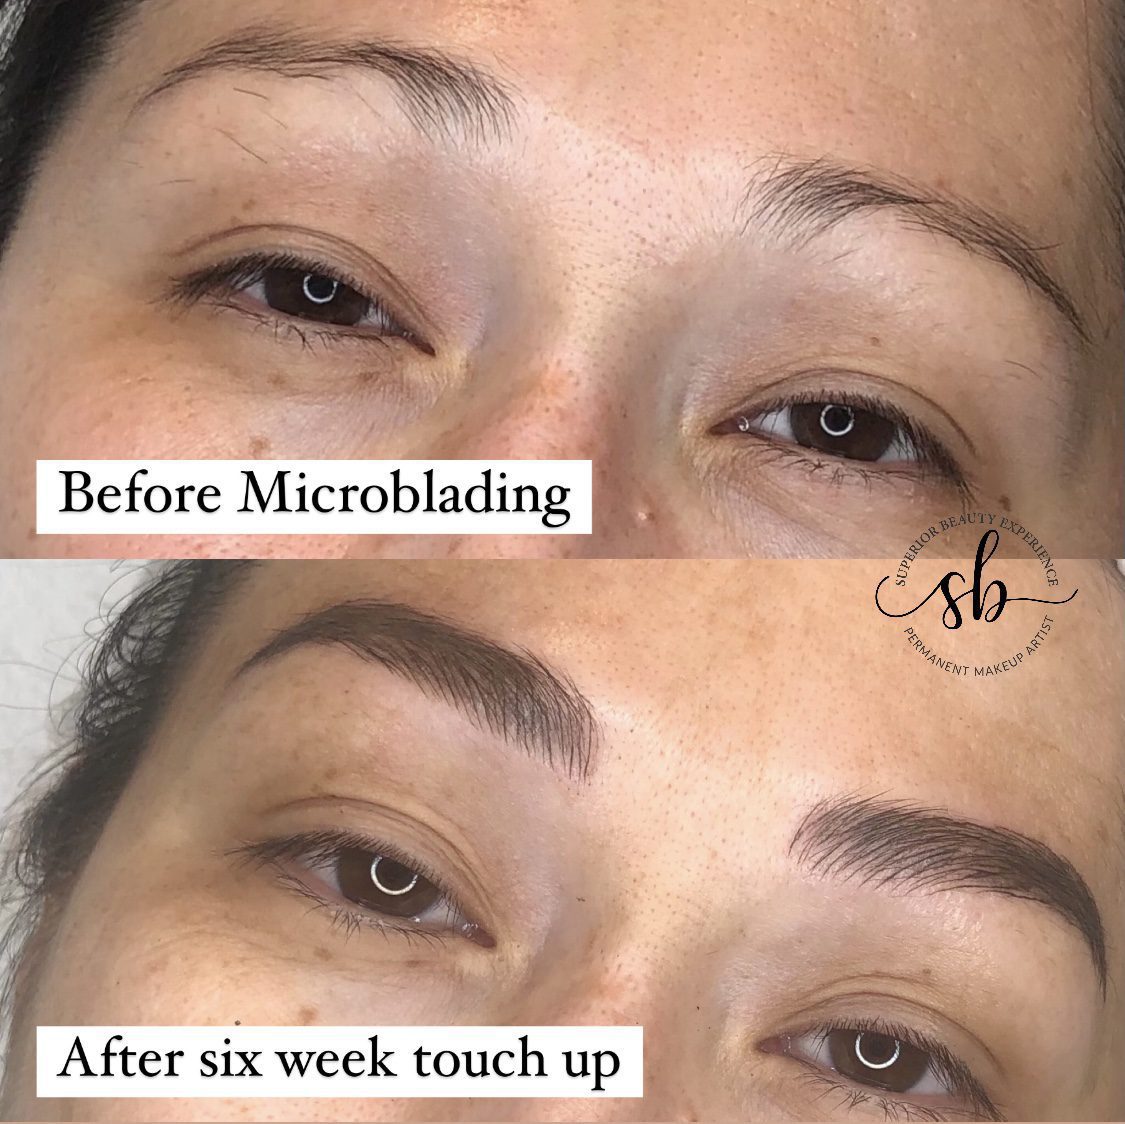 superior beauty experience waco, texas before & after microblading service